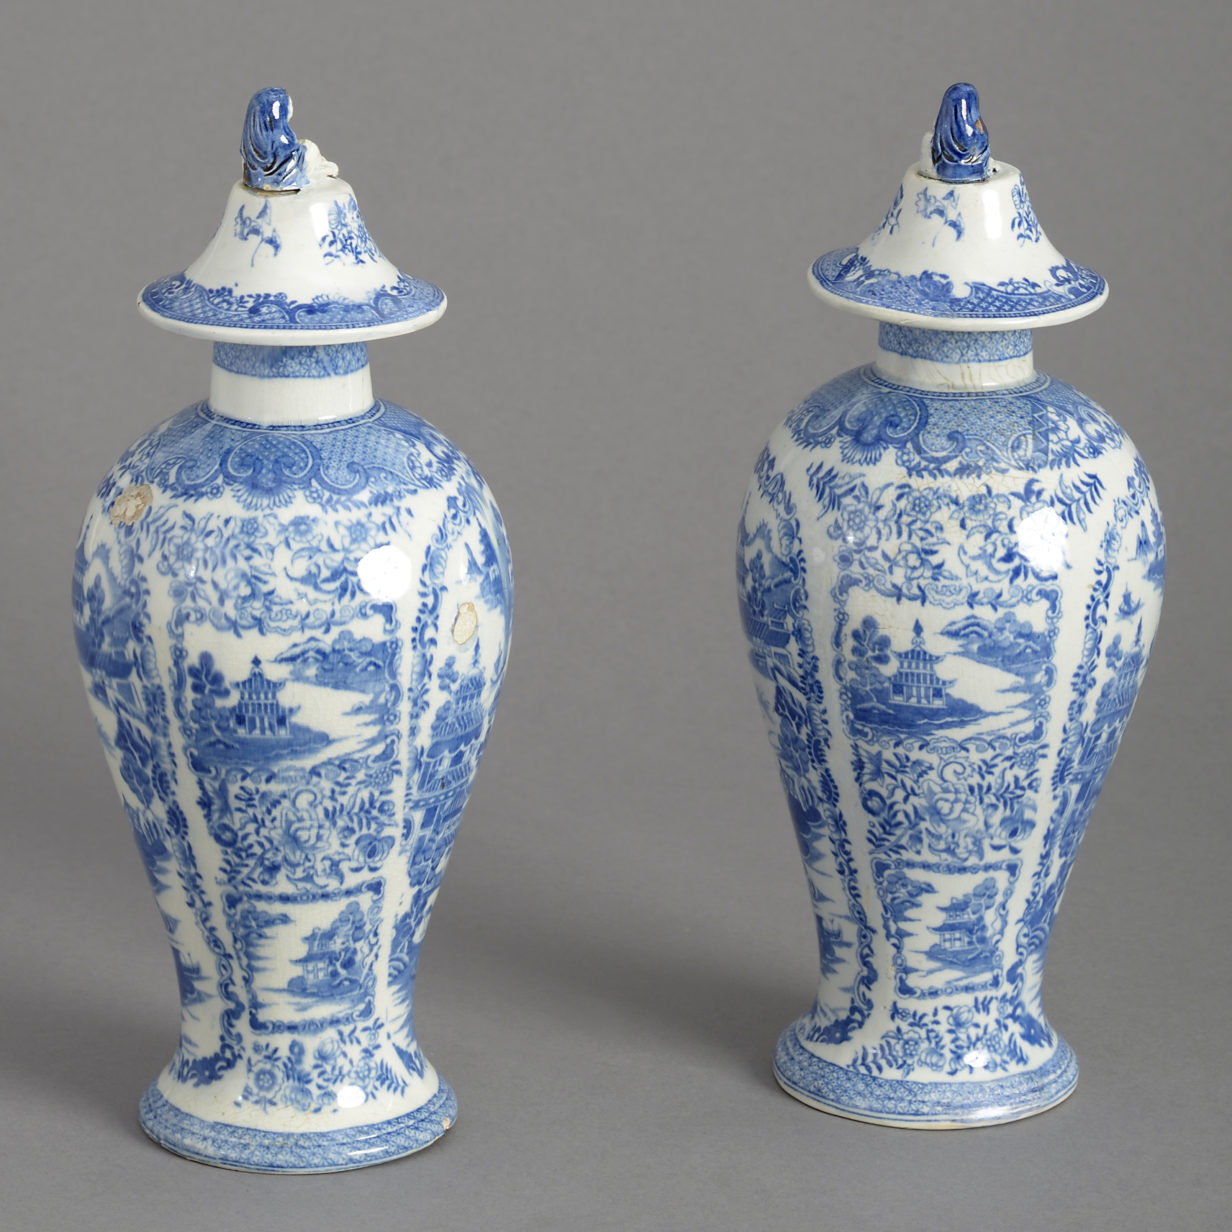 Pair of 18th century blue and white staffordshire pottery vases